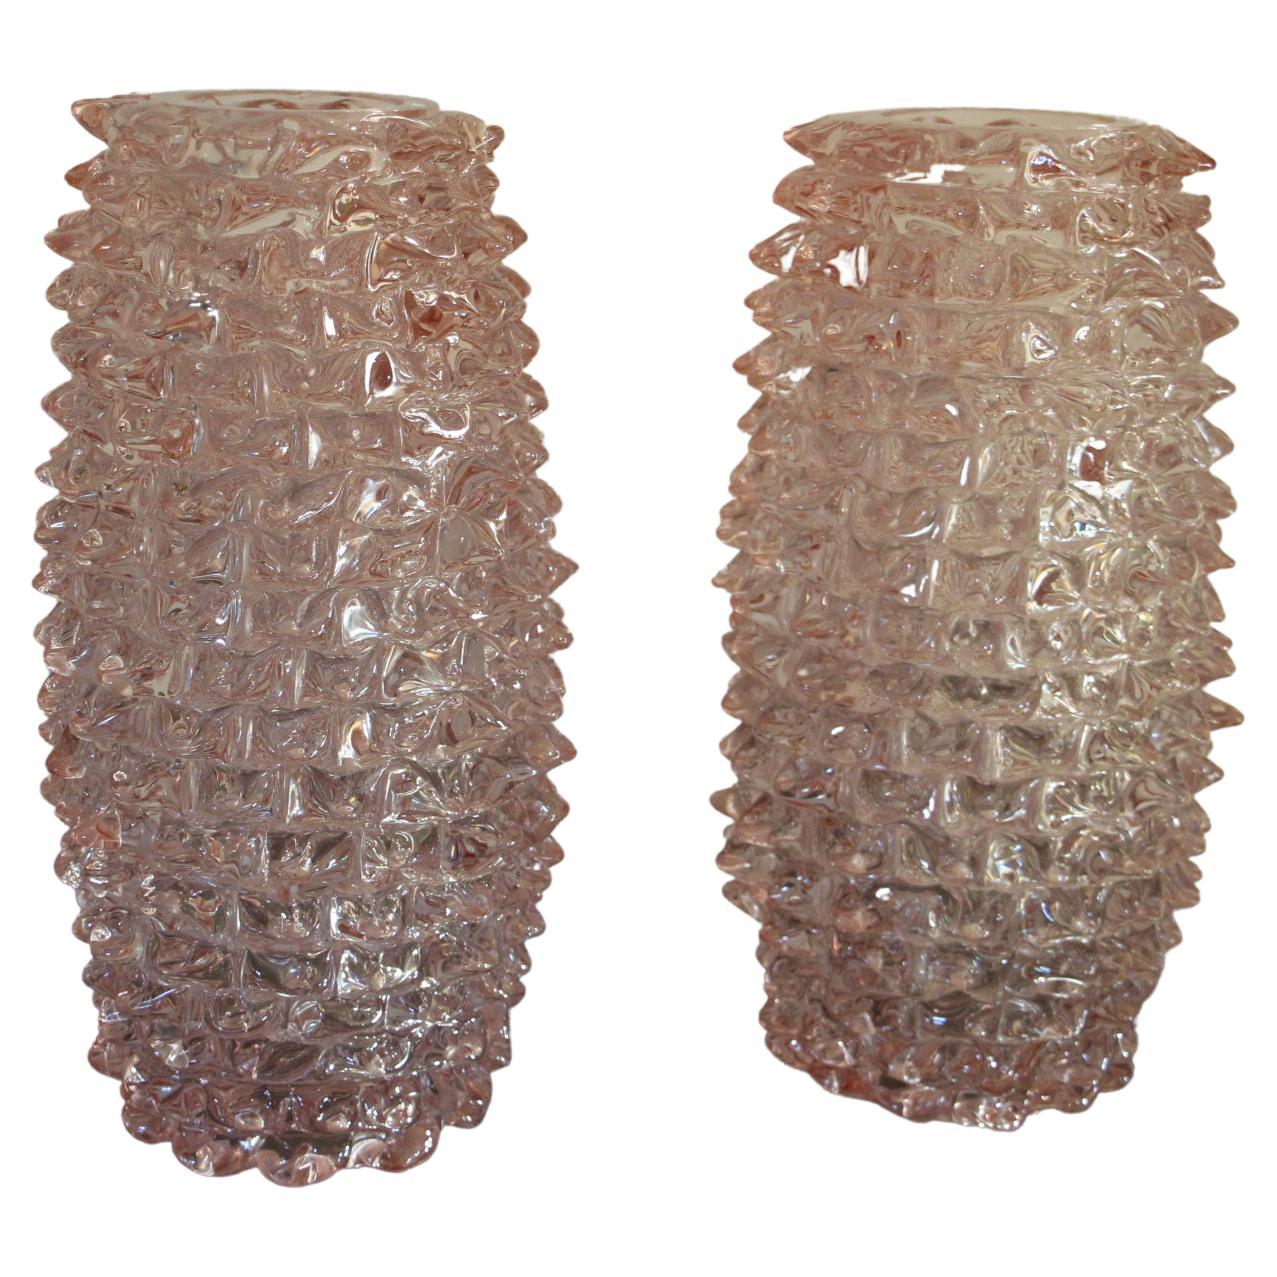 Pair of Tall Pink Vases in Murano Glass with Spikes Decor, Barovier Style